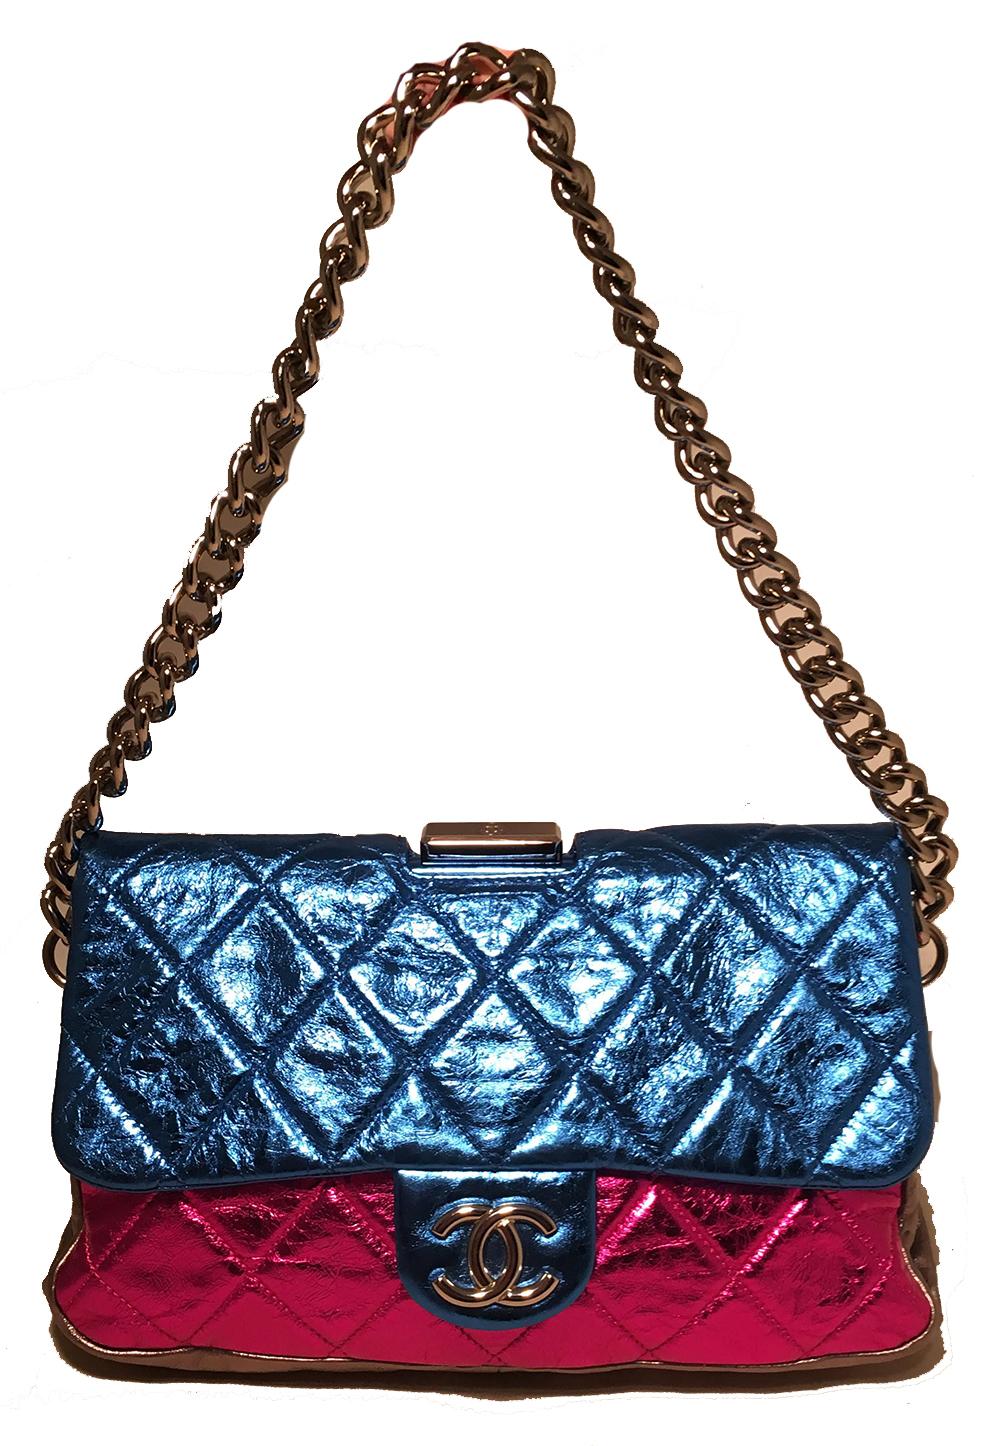 Chanel Pink Blue Silver Black Metallic Leather Classic Flap Frame Shoulder Bag in excellent condition. Pink, Blue, Silver, and Black metallic foil leather exterior trimmed with silver hardware. Front and back quilted in signature diamond pattern.